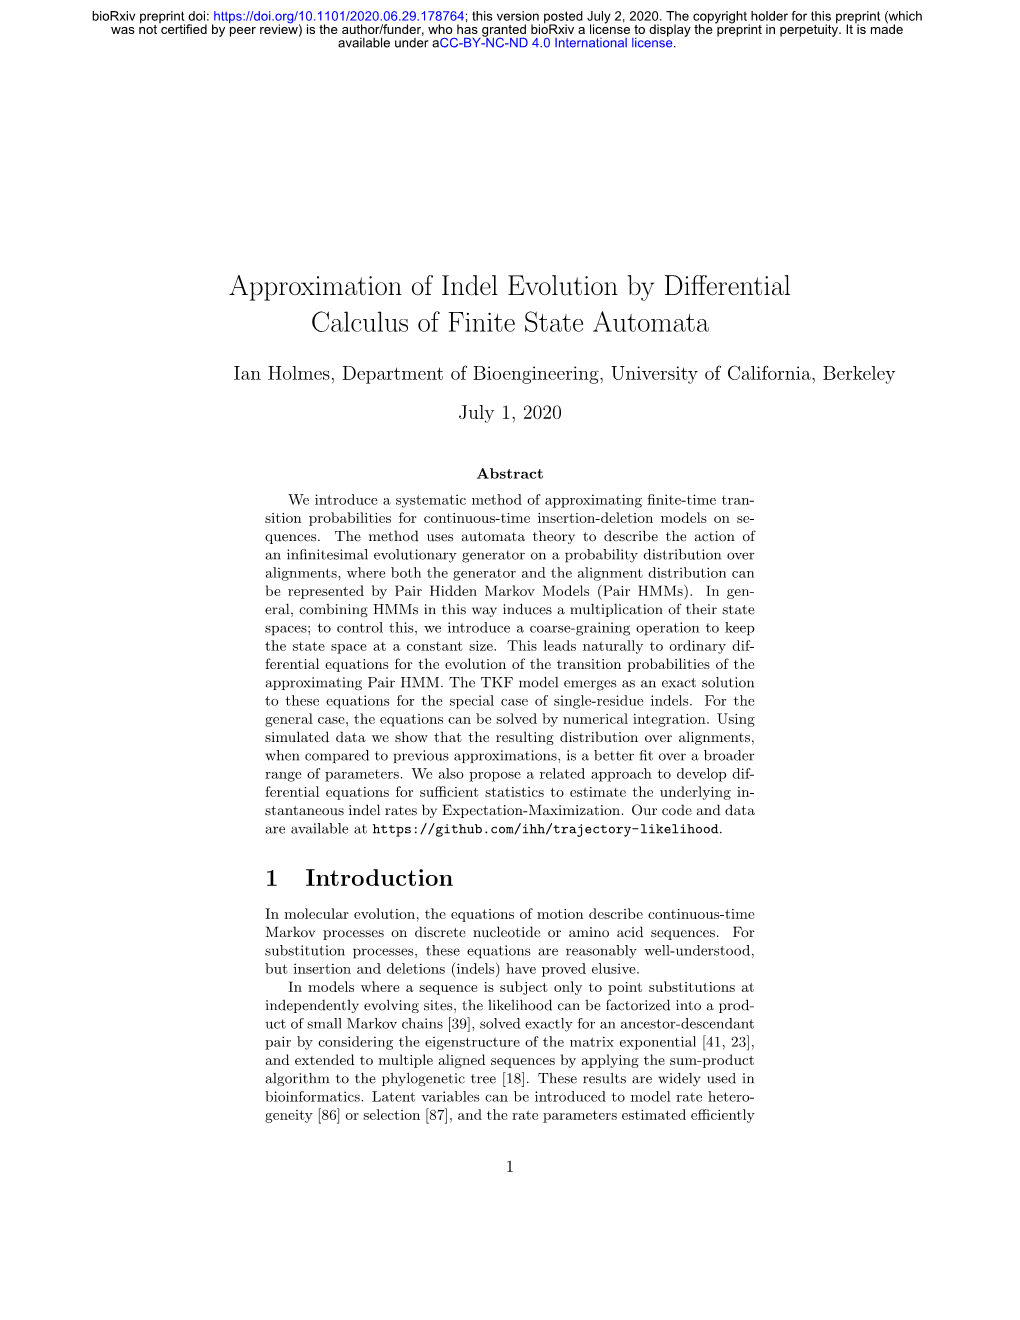 Approximation of Indel Evolution by Differential Calculus of Finite State